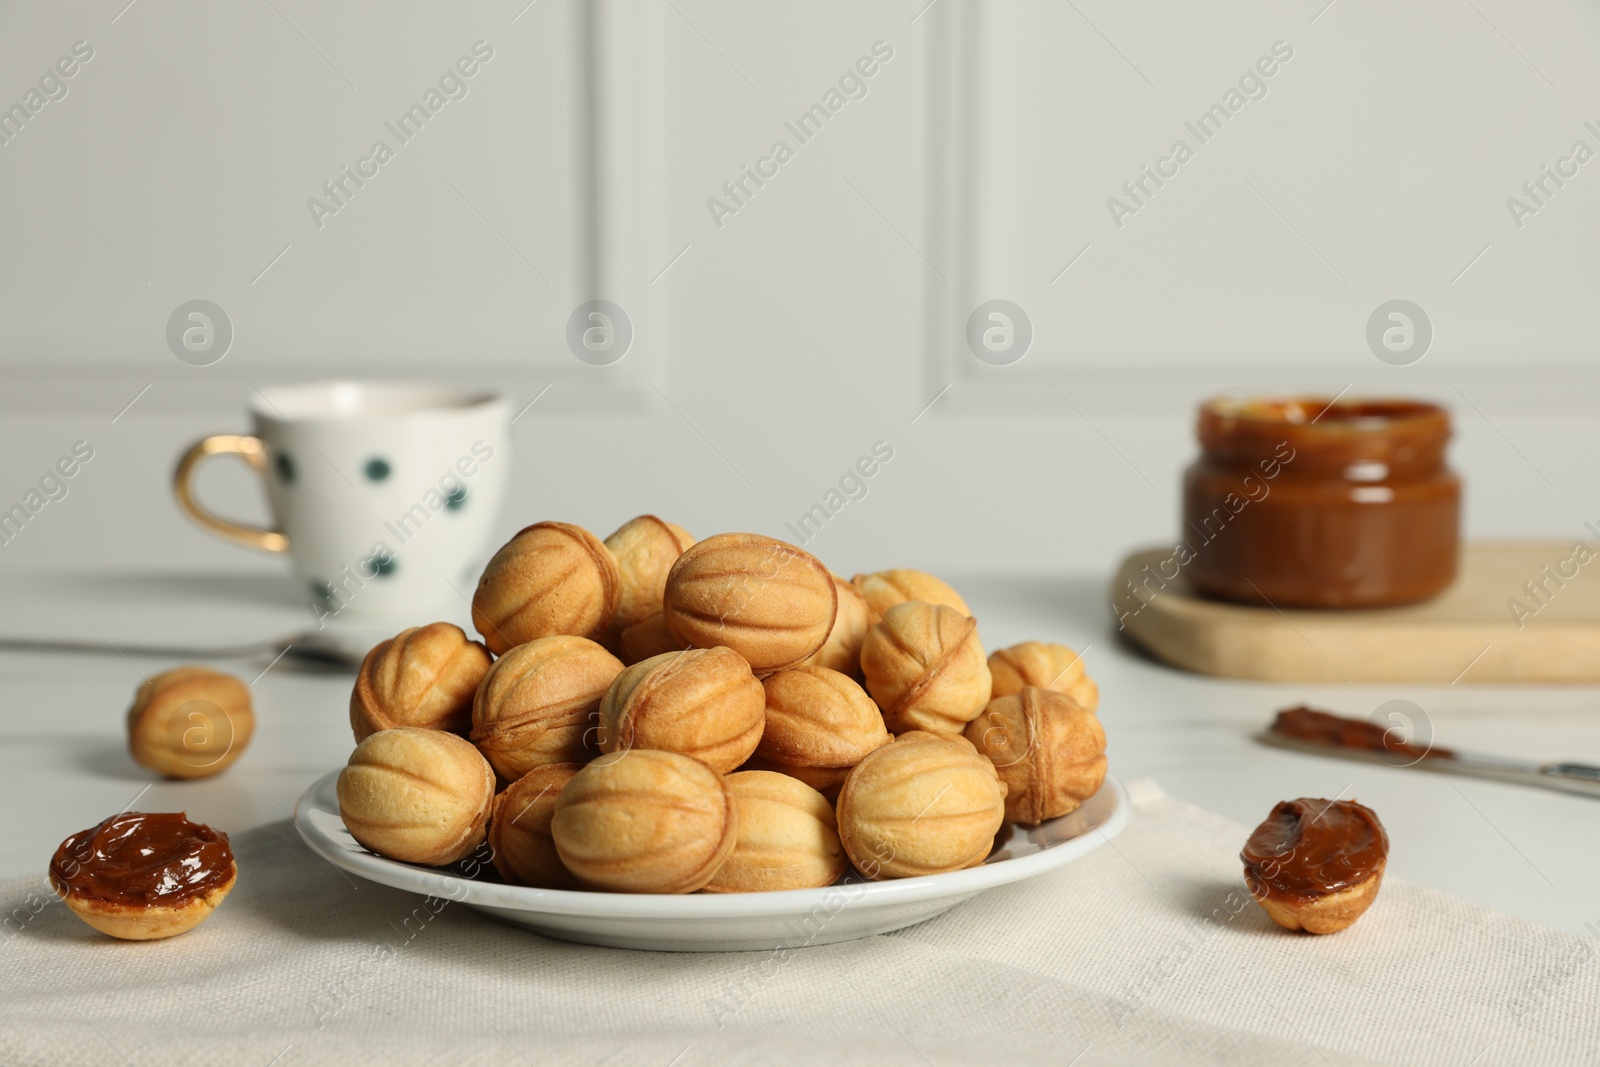 Photo of Homemade walnut shaped cookies with boiled condensed milk on table